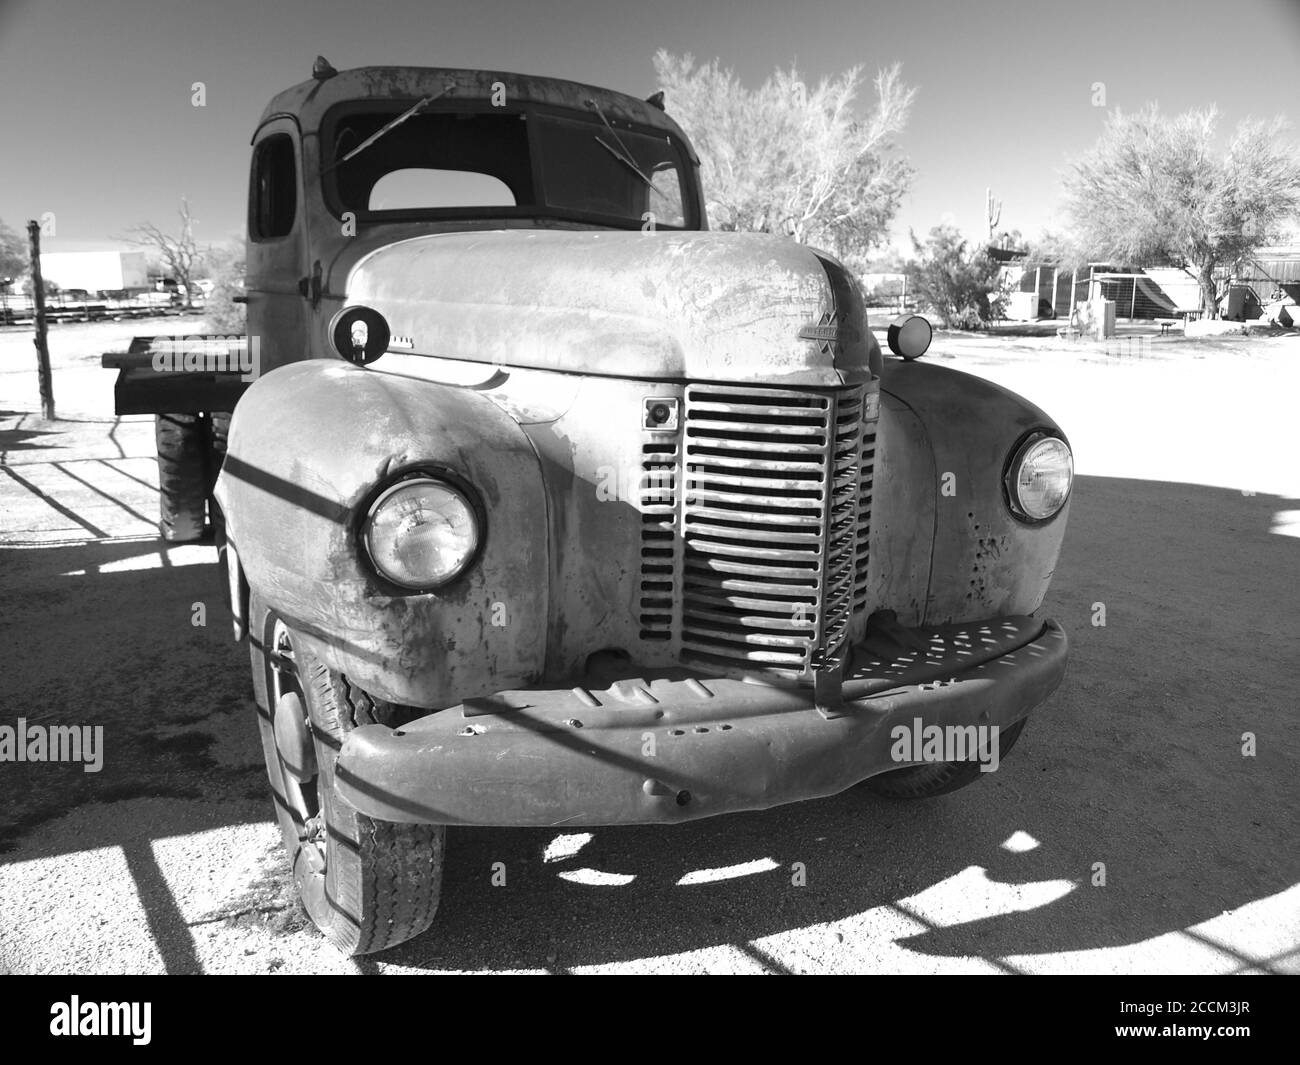 Black and white  image of an old International flatbed truck near Scottsdale, Arizona, USA.  Derelict truck is forlorn sitting in the desert. Stock Photo